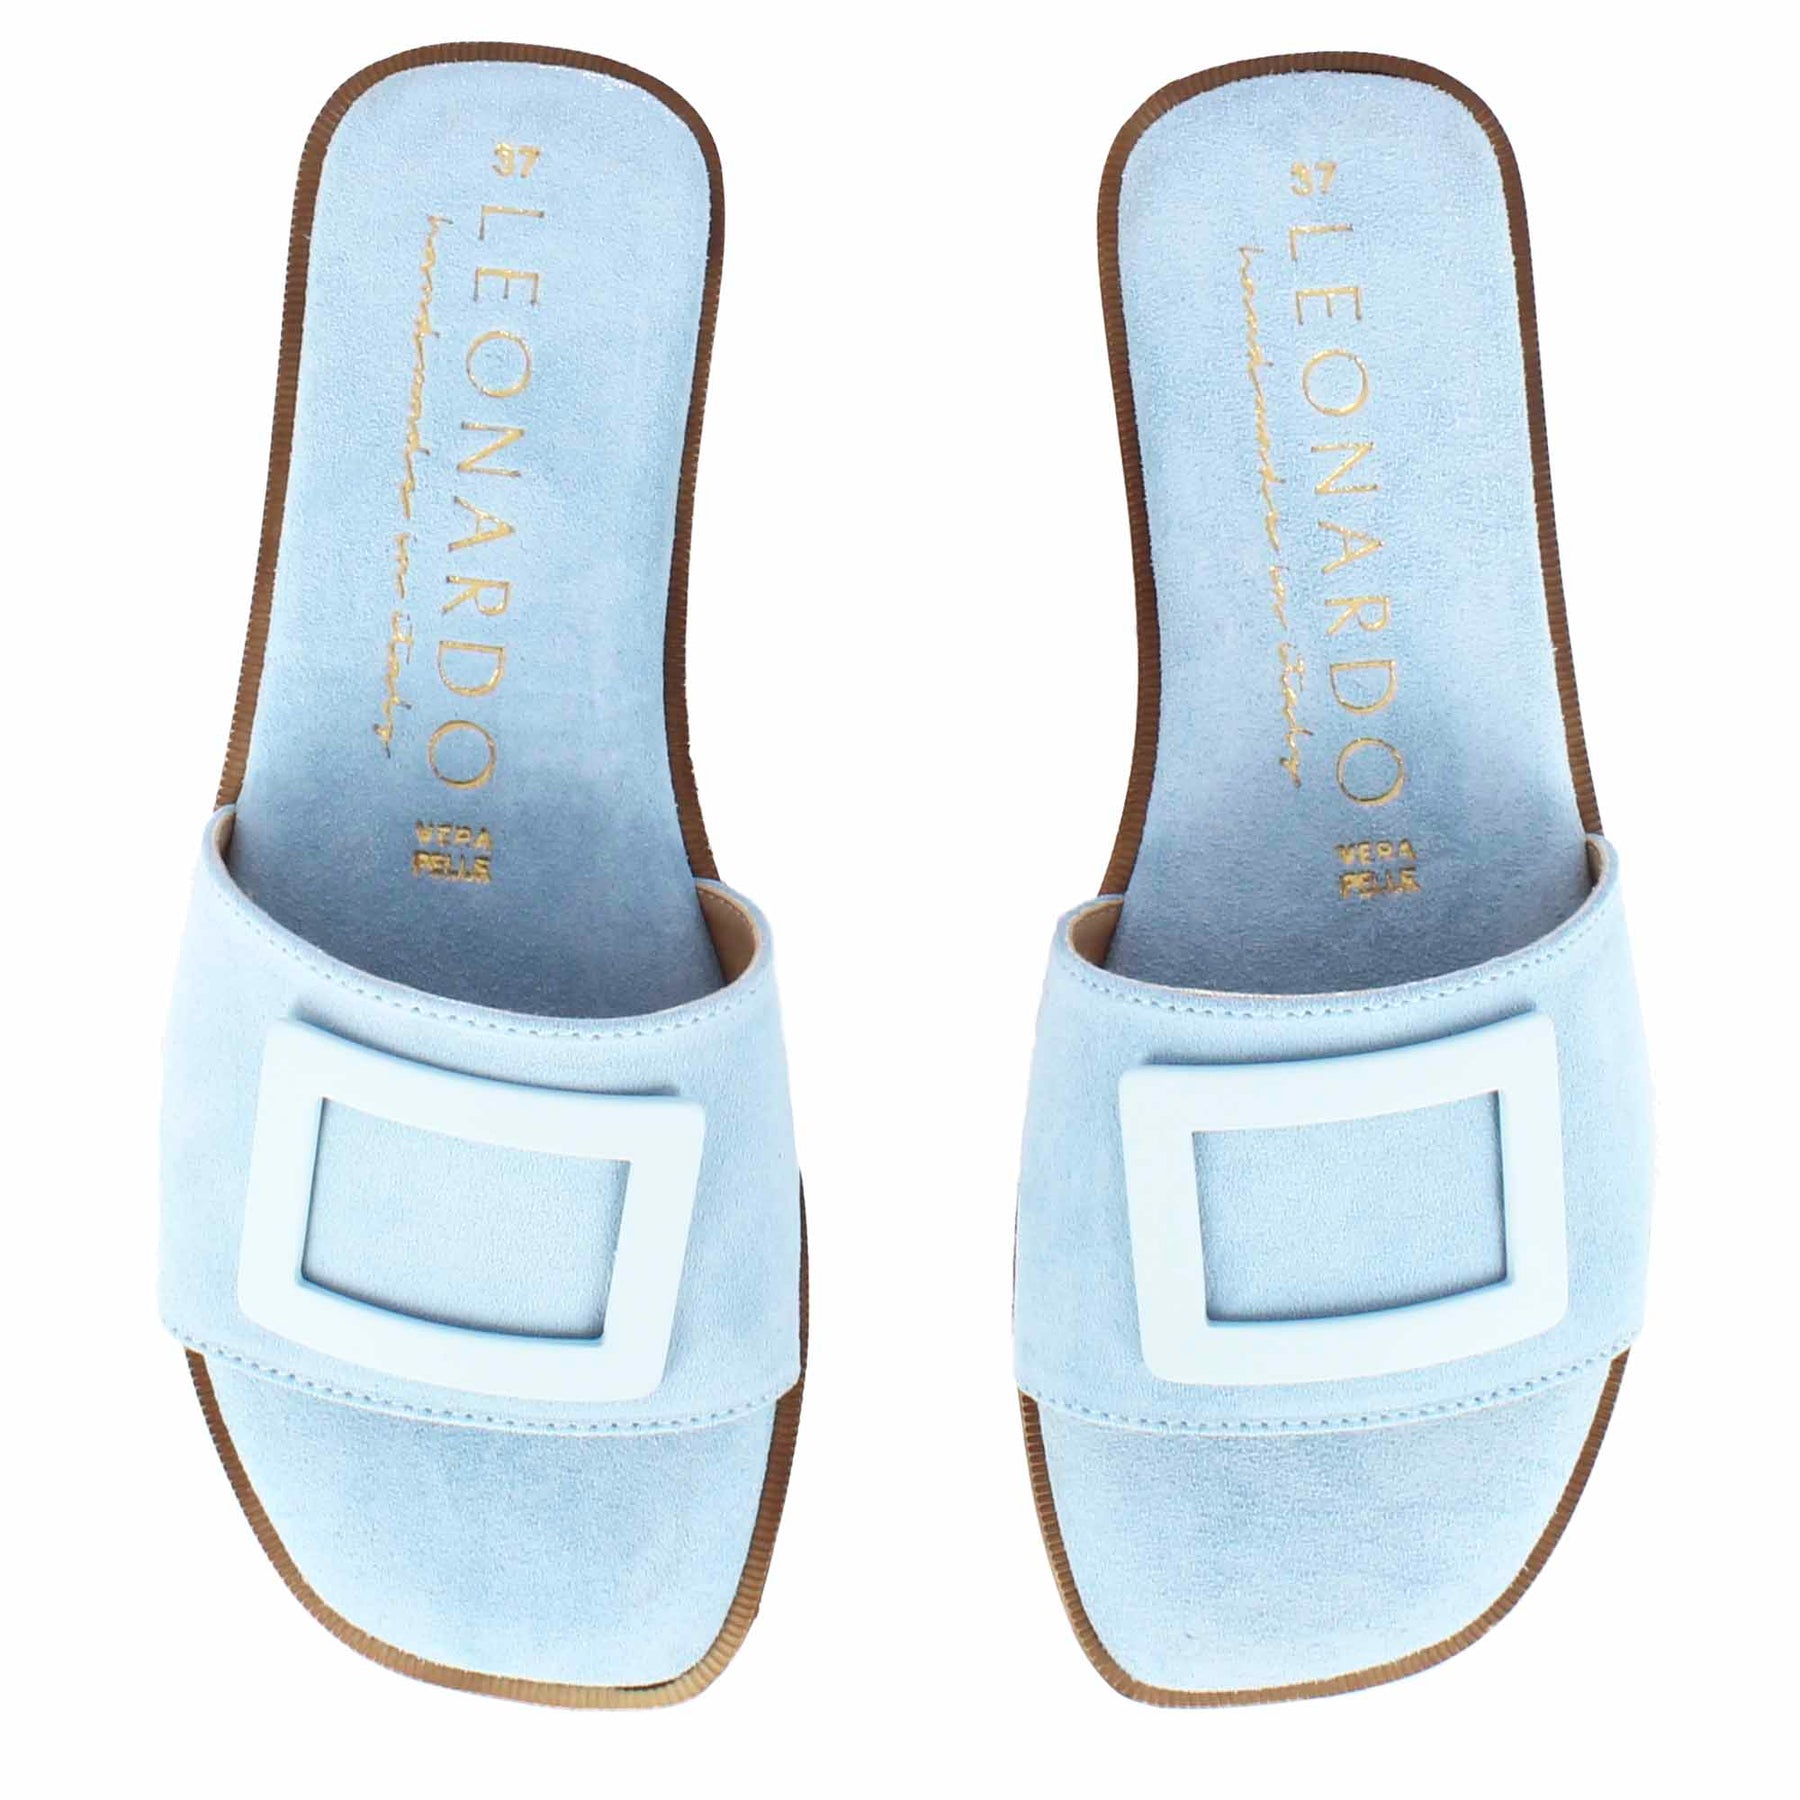 Women's suede slippers with turquoise band